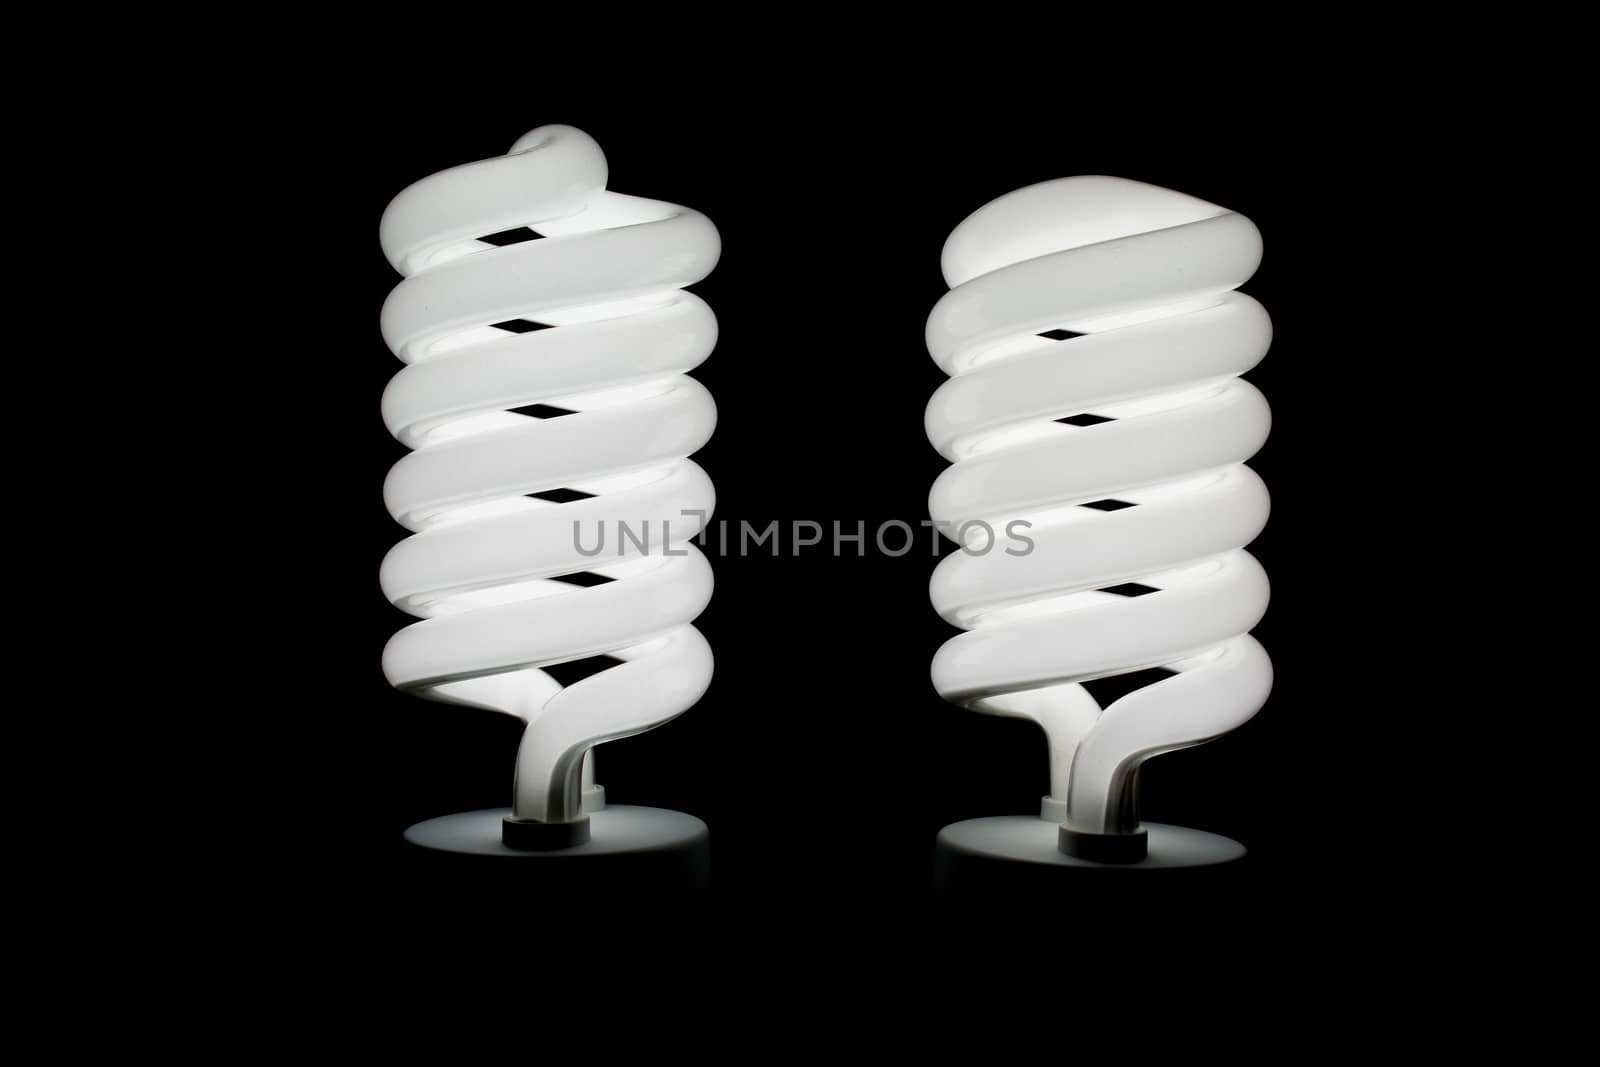 Two low energy spiral light bulbs illuminated by Russell102